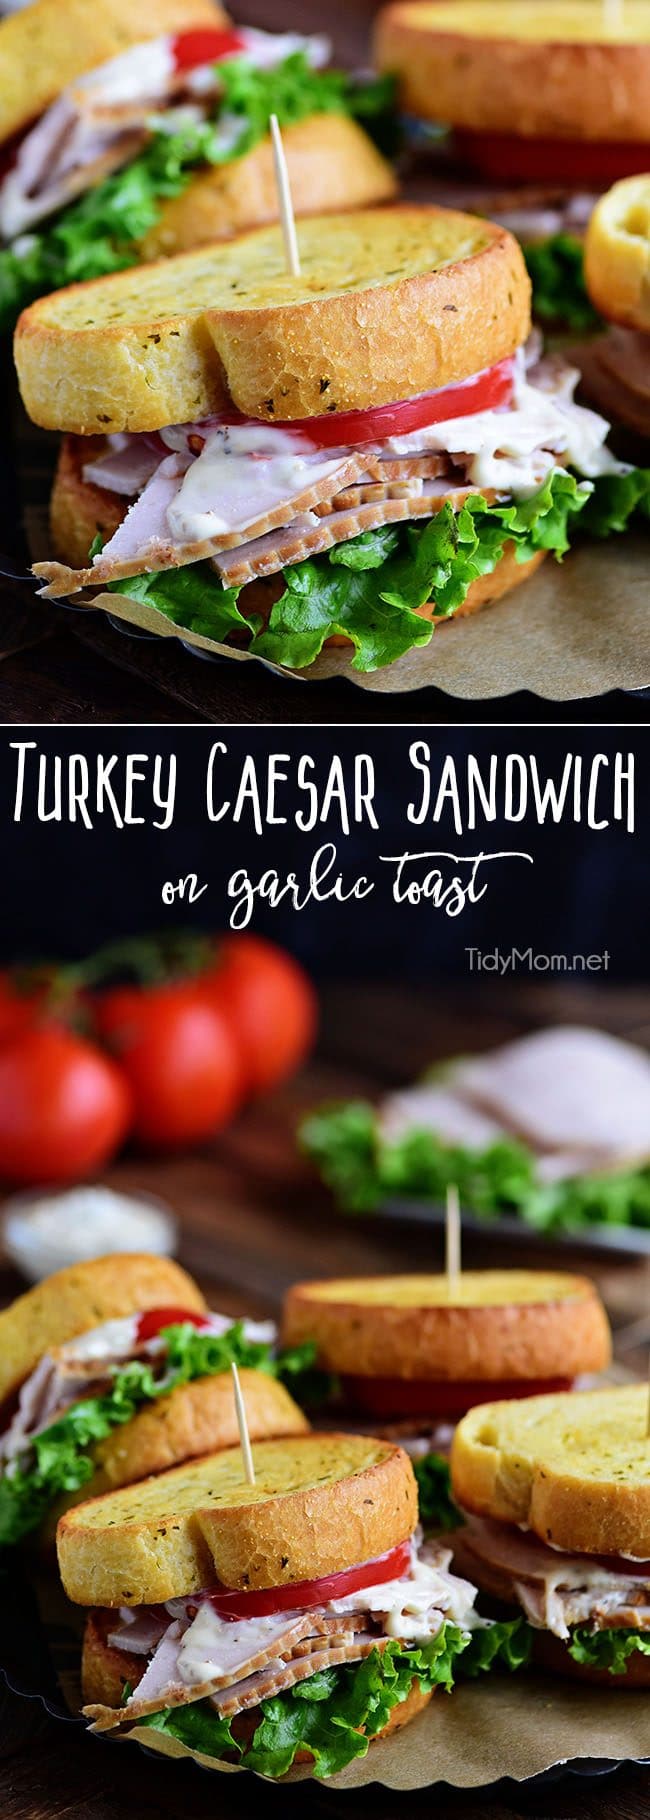 Texas garlic toast turns an ordinary Turkey Caesar Sandwich into something special. It's the perfect way to use up leftover Thanksgiving turkey or enjoy any day with deli sliced turkey! Print recipe at TidyMom.net 